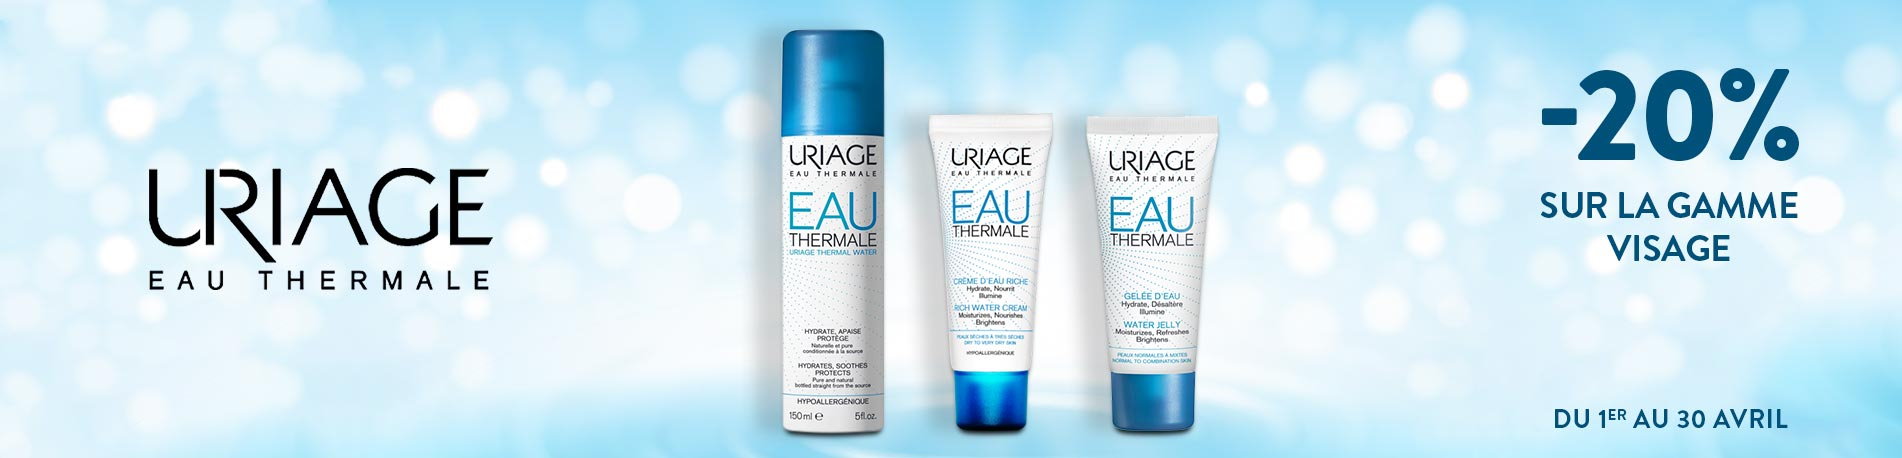 Promotion Uriage Eau thermale